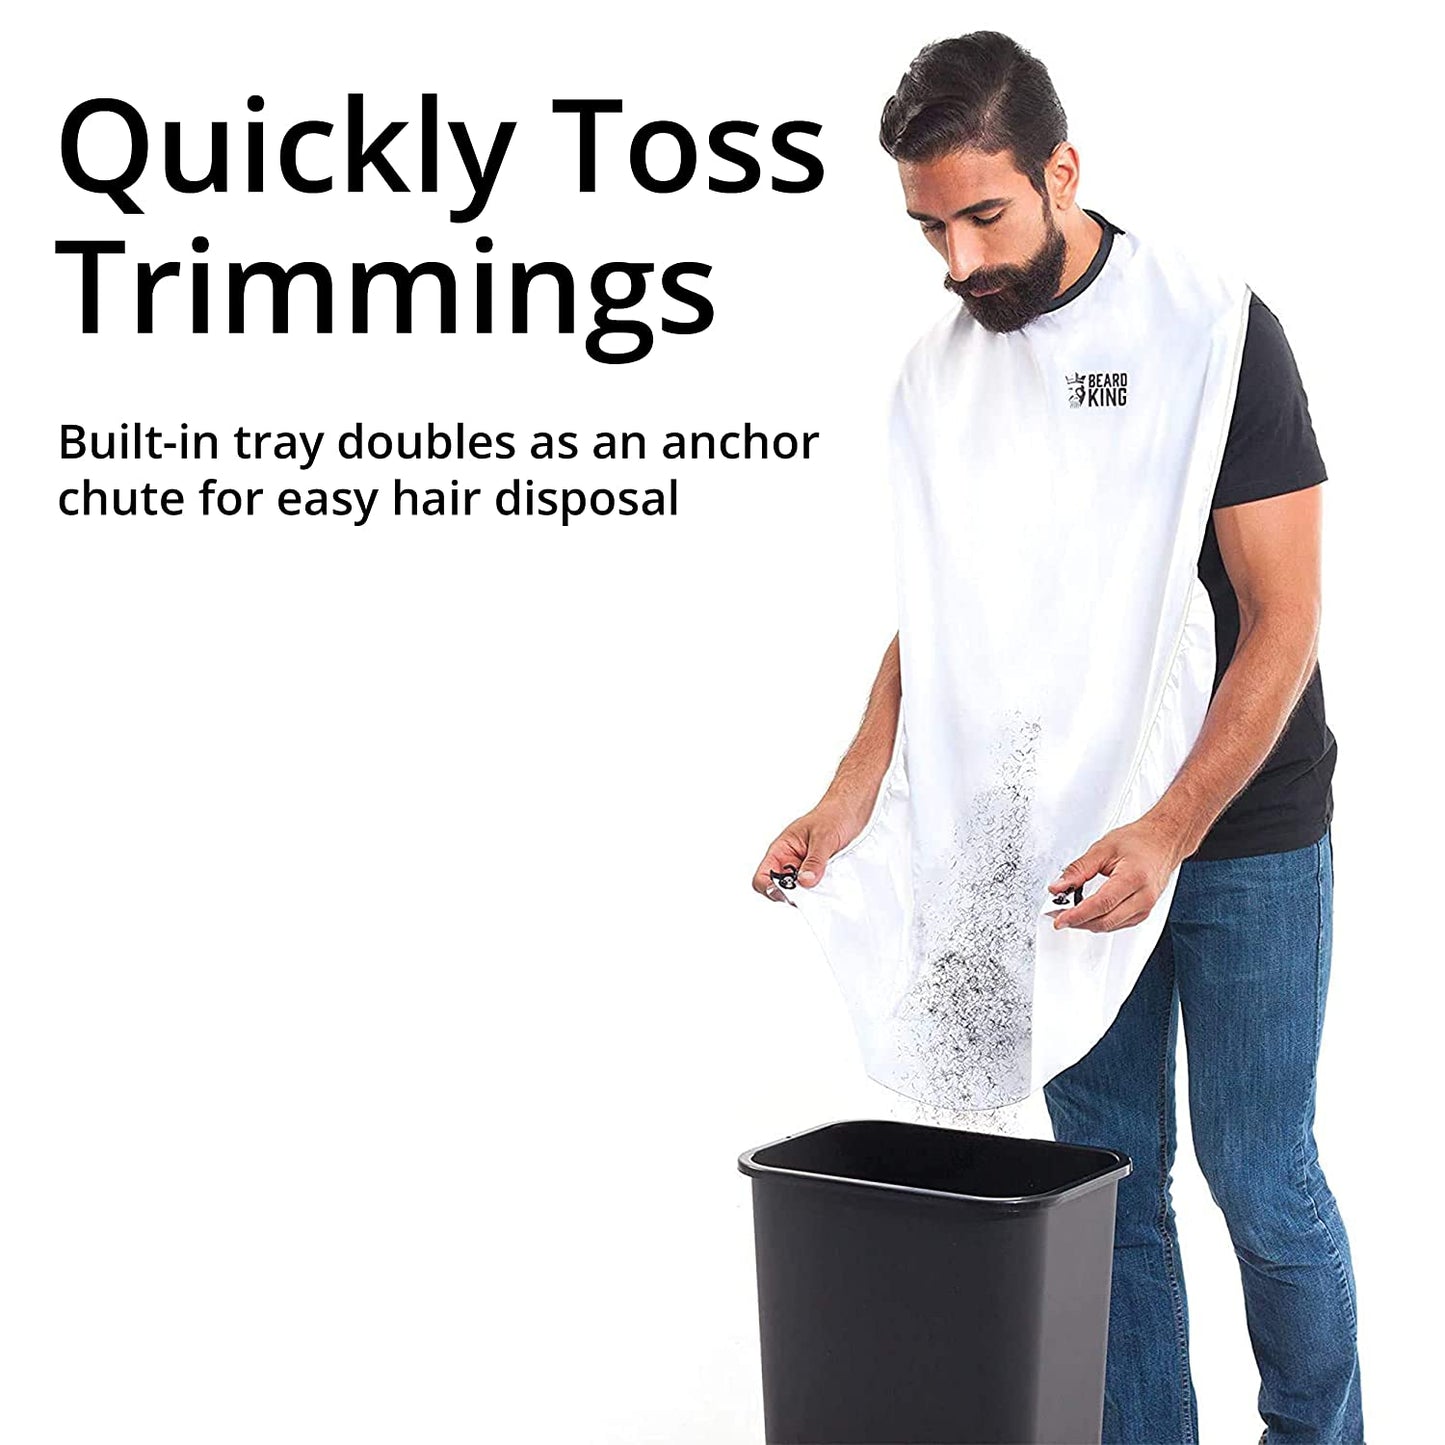 A man is tossing beard clippings into a trash can from his beard bib apron. The text reads, 'Quickly toss trimmings. Built-in tray doubles as an anchor chute for easy hair disposal.'